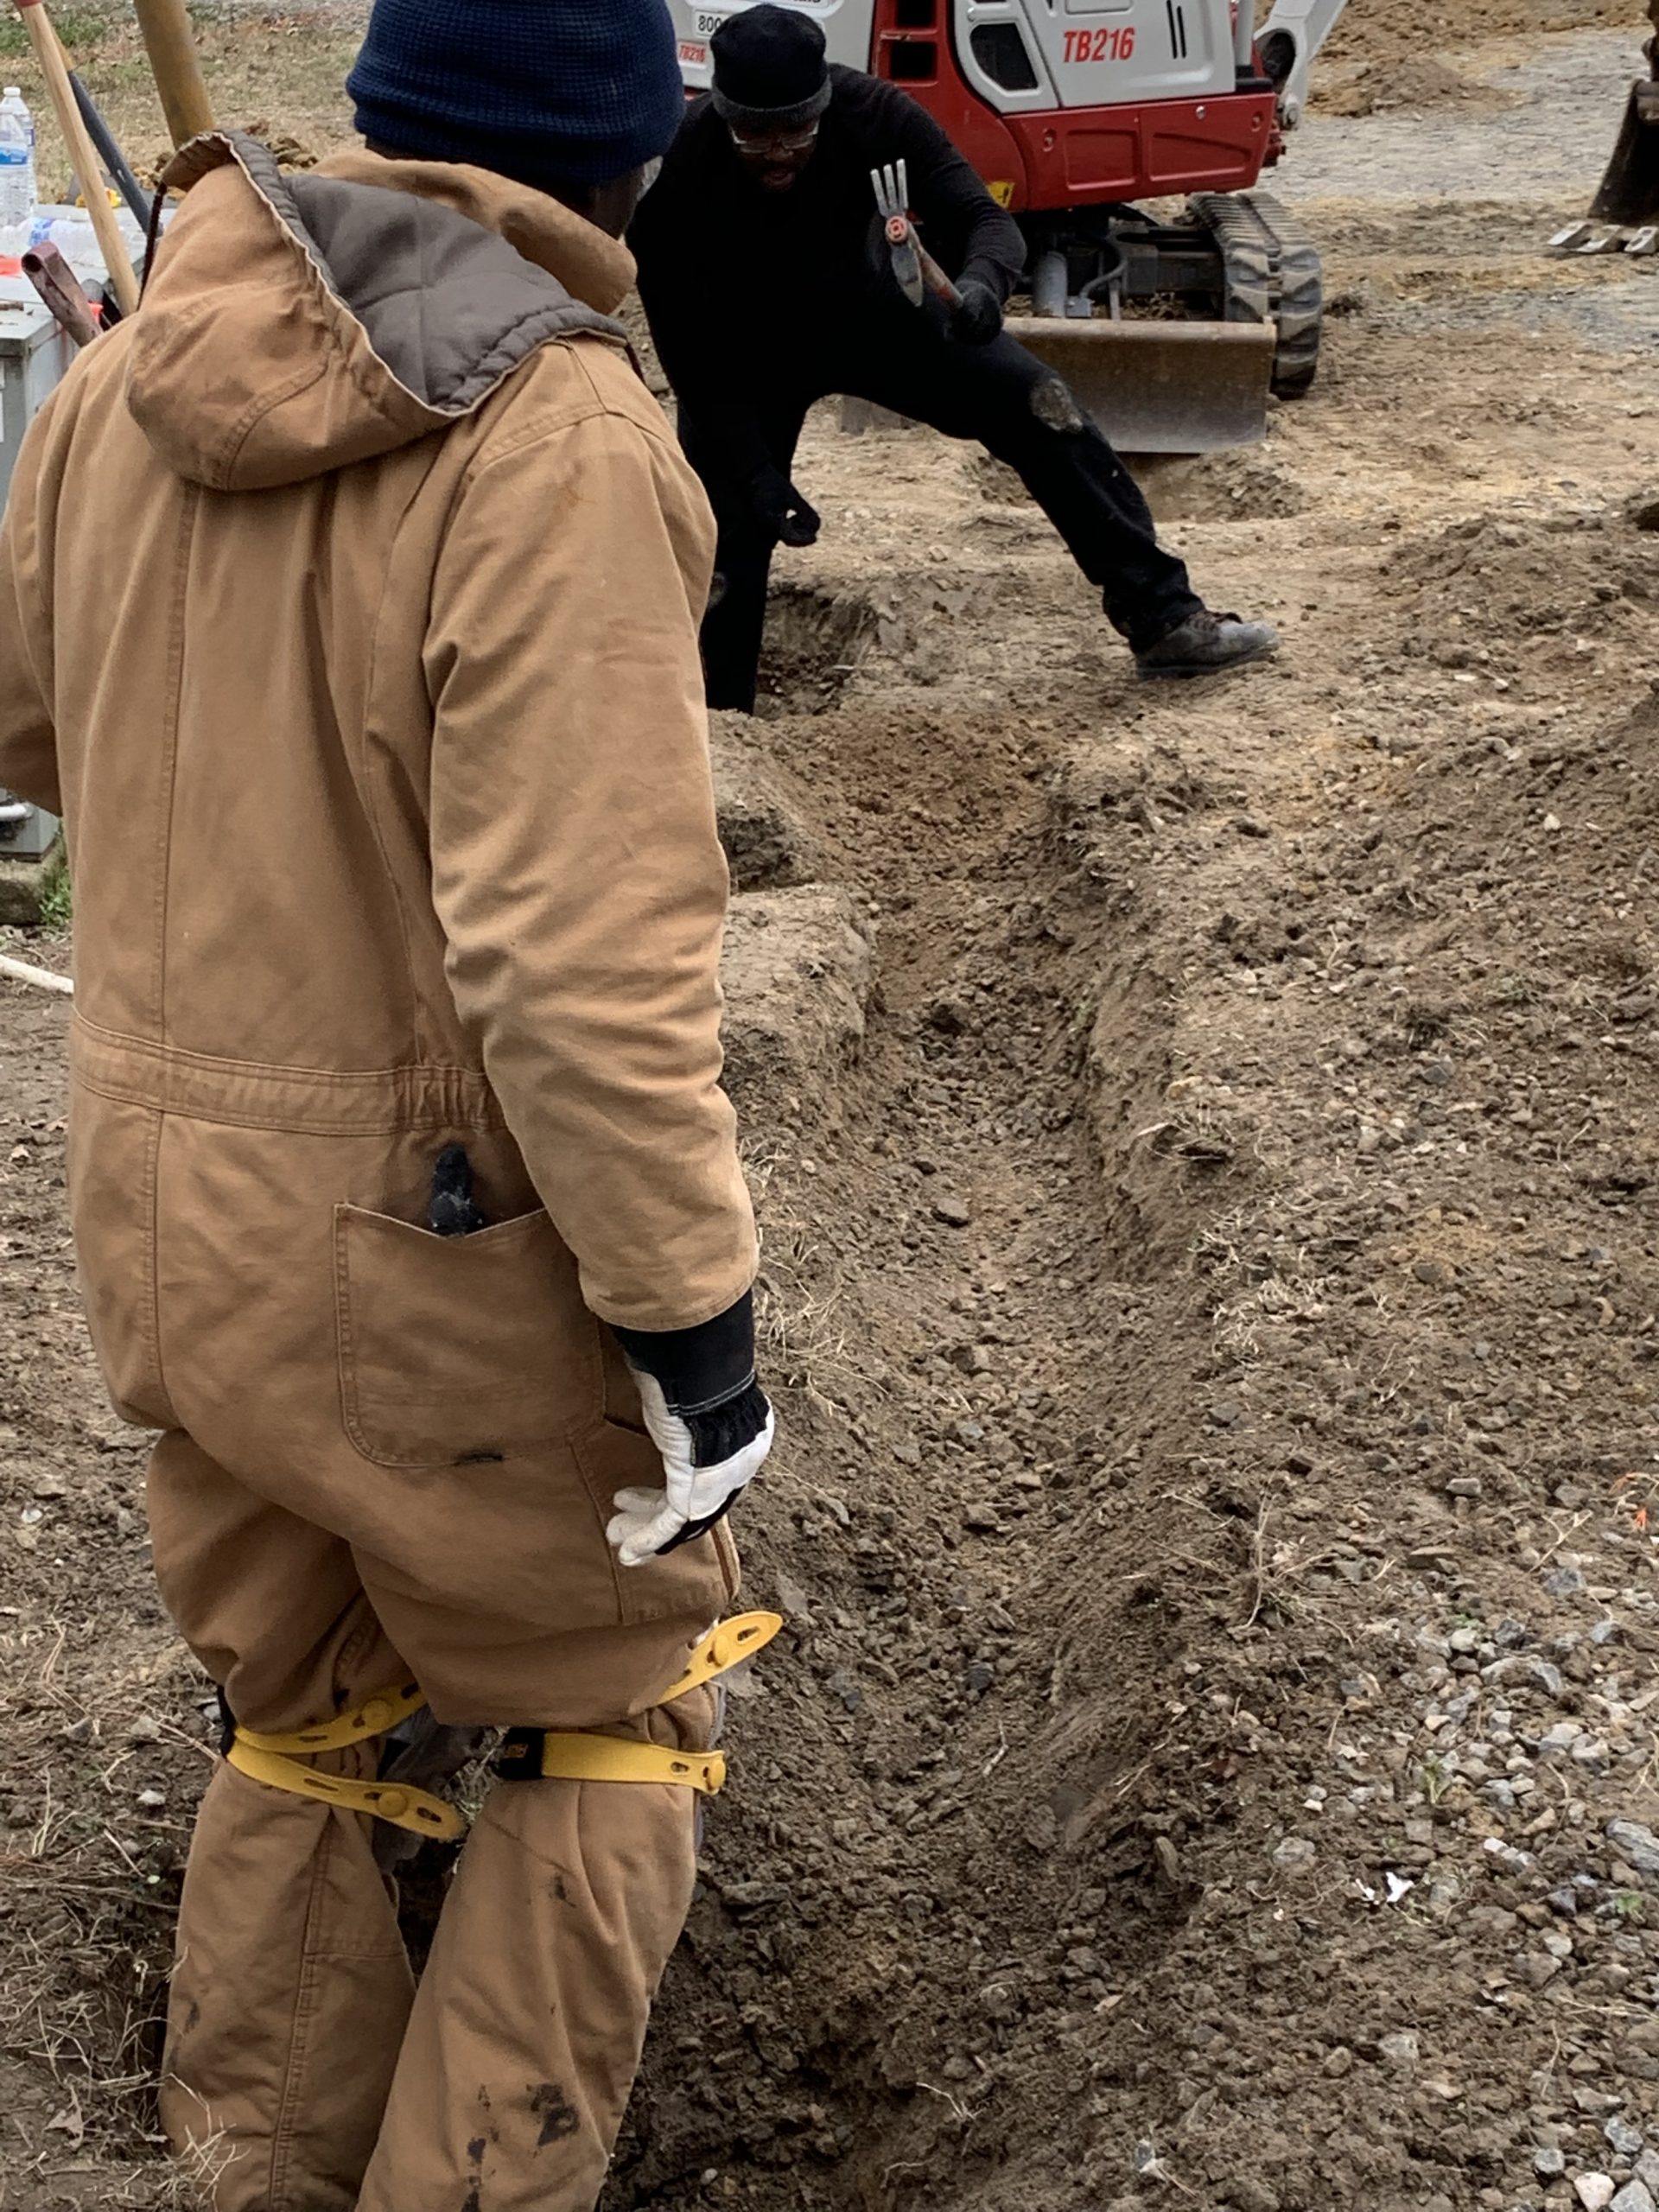 PROJECTS RF USA. Image 4.  Open ditch for installation of fiber optic cable (06/03/2019)